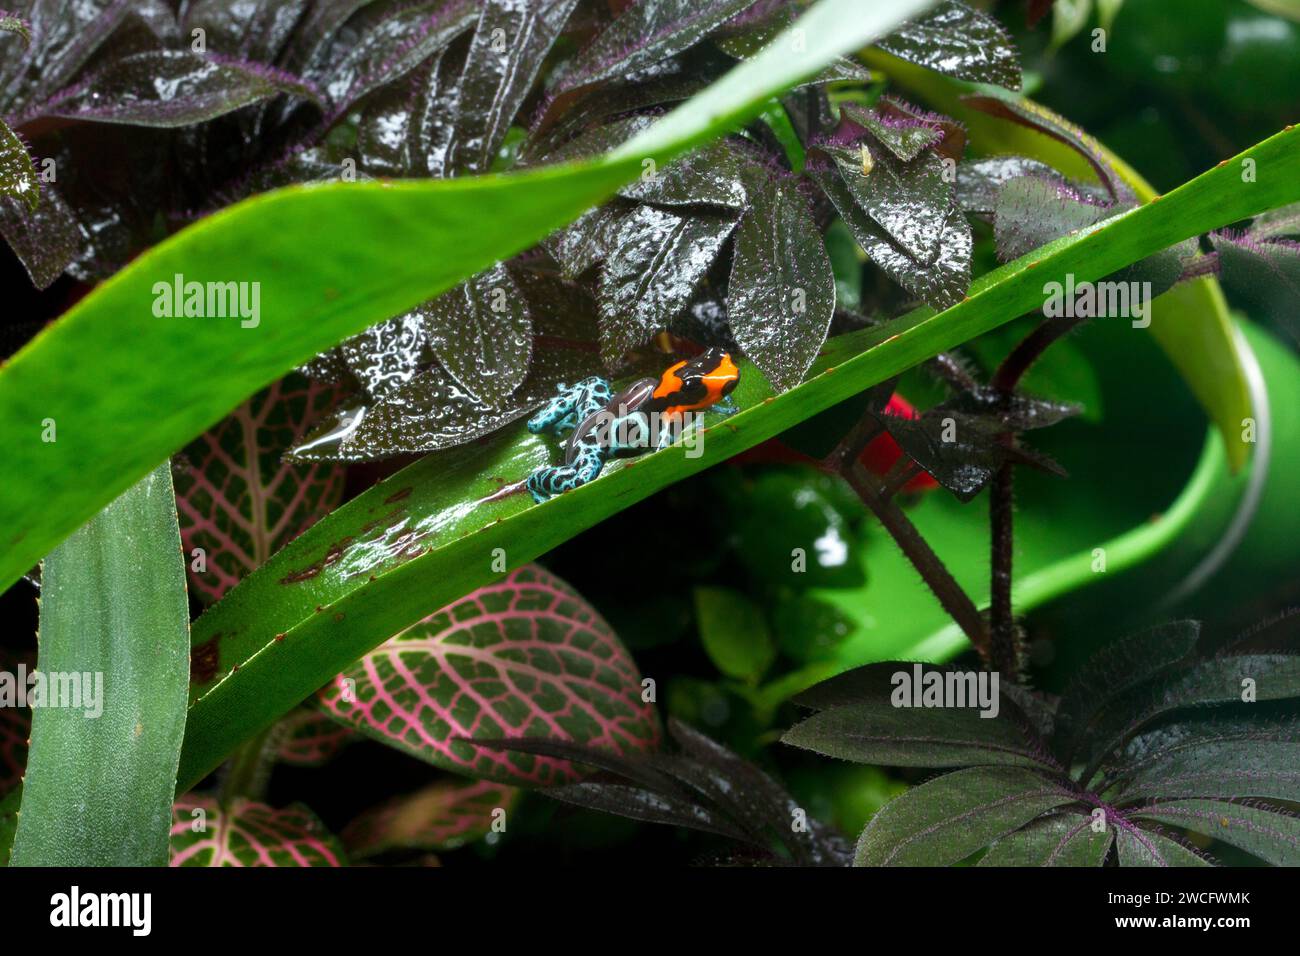 A captive bred male Ranitomeya benedicta, a species of poison dart frogs native to Peru, in a terrarium and carrying a tadpole on his back. Stock Photo